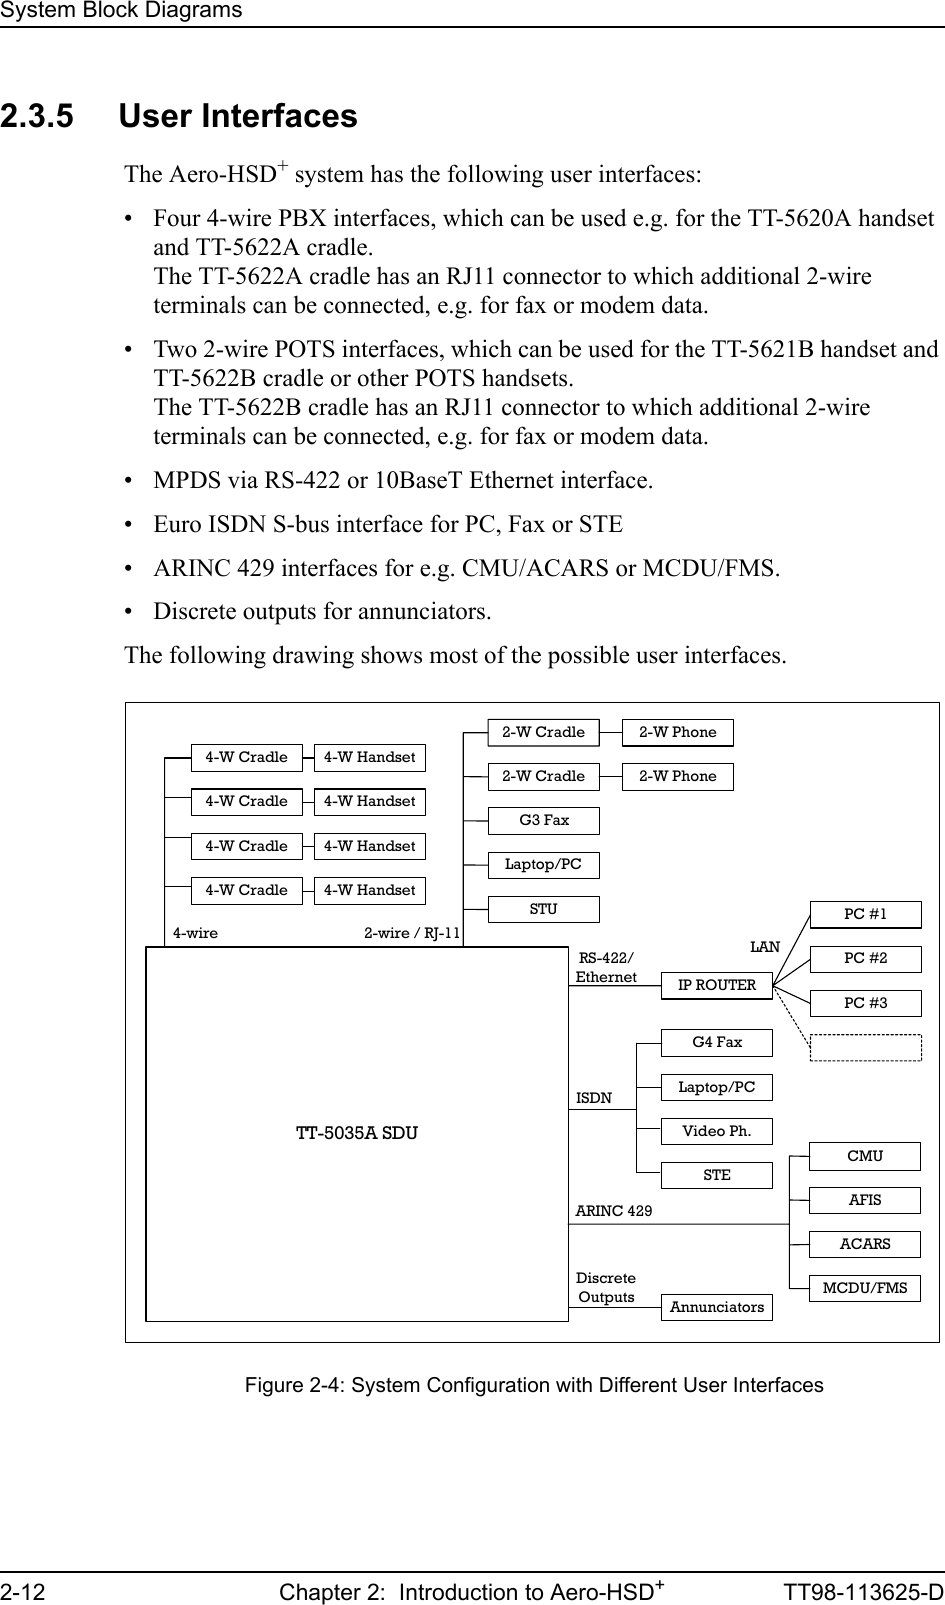 System Block Diagrams2-12 Chapter 2:  Introduction to Aero-HSD+TT98-113625-D2.3.5 User InterfacesThe Aero-HSD+ system has the following user interfaces:• Four 4-wire PBX interfaces, which can be used e.g. for the TT-5620A handset and TT-5622A cradle.The TT-5622A cradle has an RJ11 connector to which additional 2-wire terminals can be connected, e.g. for fax or modem data. • Two 2-wire POTS interfaces, which can be used for the TT-5621B handset and TT-5622B cradle or other POTS handsets. The TT-5622B cradle has an RJ11 connector to which additional 2-wire terminals can be connected, e.g. for fax or modem data.• MPDS via RS-422 or 10BaseT Ethernet interface.• Euro ISDN S-bus interface for PC, Fax or STE• ARINC 429 interfaces for e.g. CMU/ACARS or MCDU/FMS.• Discrete outputs for annunciators.The following drawing shows most of the possible user interfaces. Figure 2-4: System Configuration with Different User Interfaces4-W CradleTT-5035A SDU2-W CradleG3 FaxLaptop/PCSTUG4 FaxLaptop/PCVideo Ph.STECMUAFISACARSMCDU/FMSPC #1PC #2PC #3IP ROUTER2-wire / RJ-11ISDNRS-422/EthernetLANARINC 4292-W Cradle4-wire2-W Phone2-W Phone4-W Cradle 4-W Handset4-W Handset4-W Cradle 4-W Handset4-W Cradle 4-W HandsetAnnunciatorsDiscreteOutputs